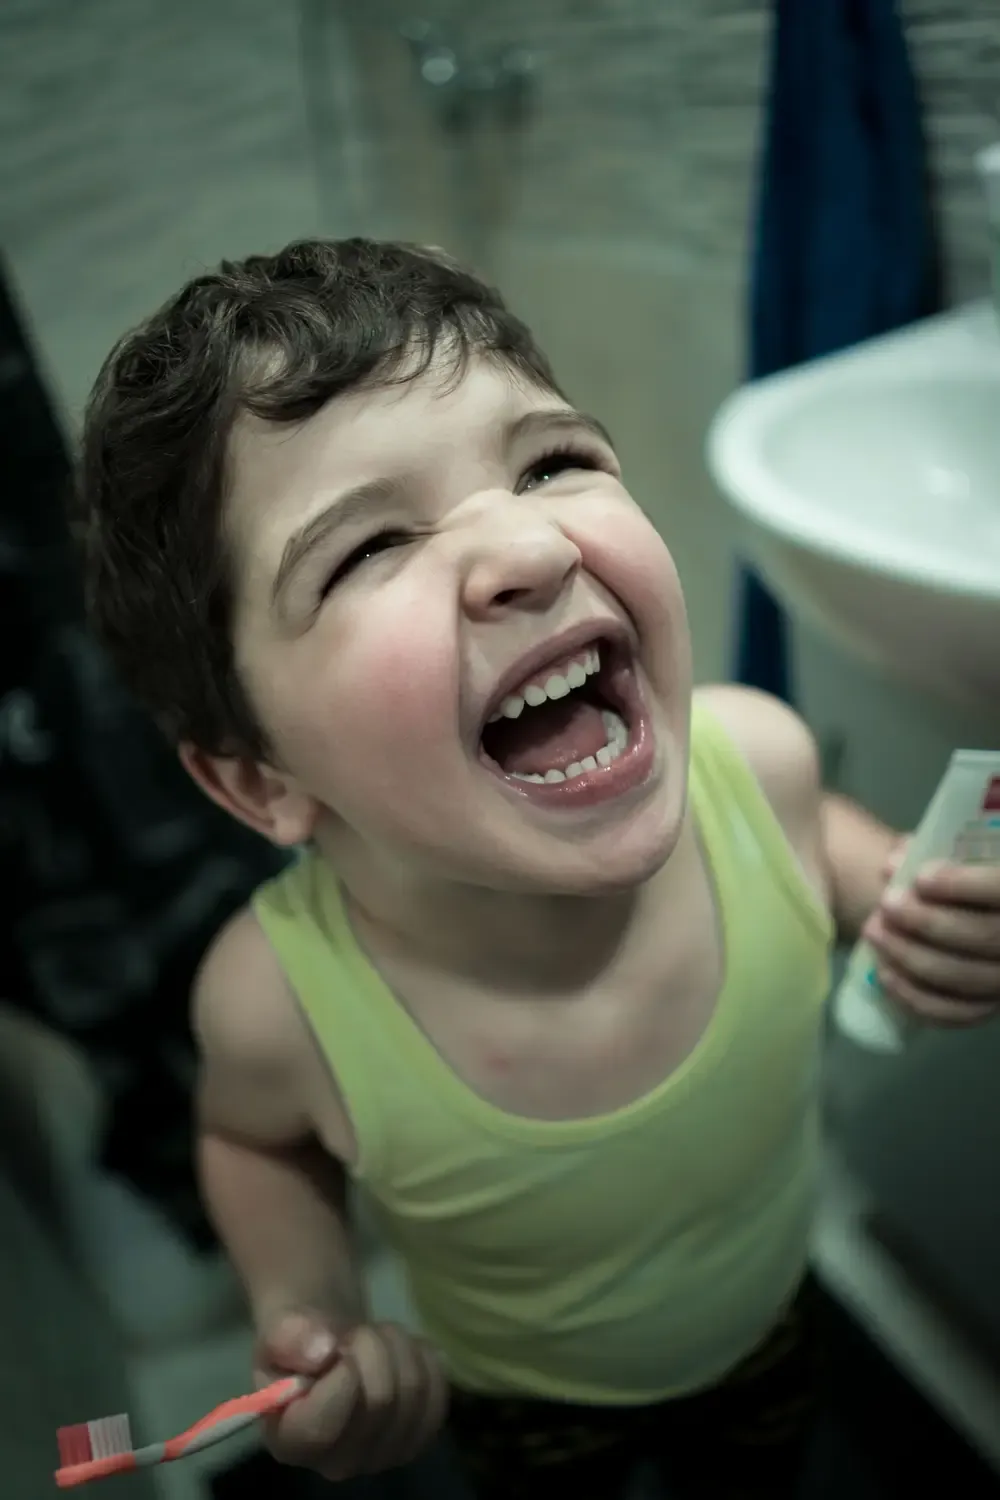 Swish and Smile: The Best Mouthwash for Kids - Keep Their Teeth Clean and Healthy